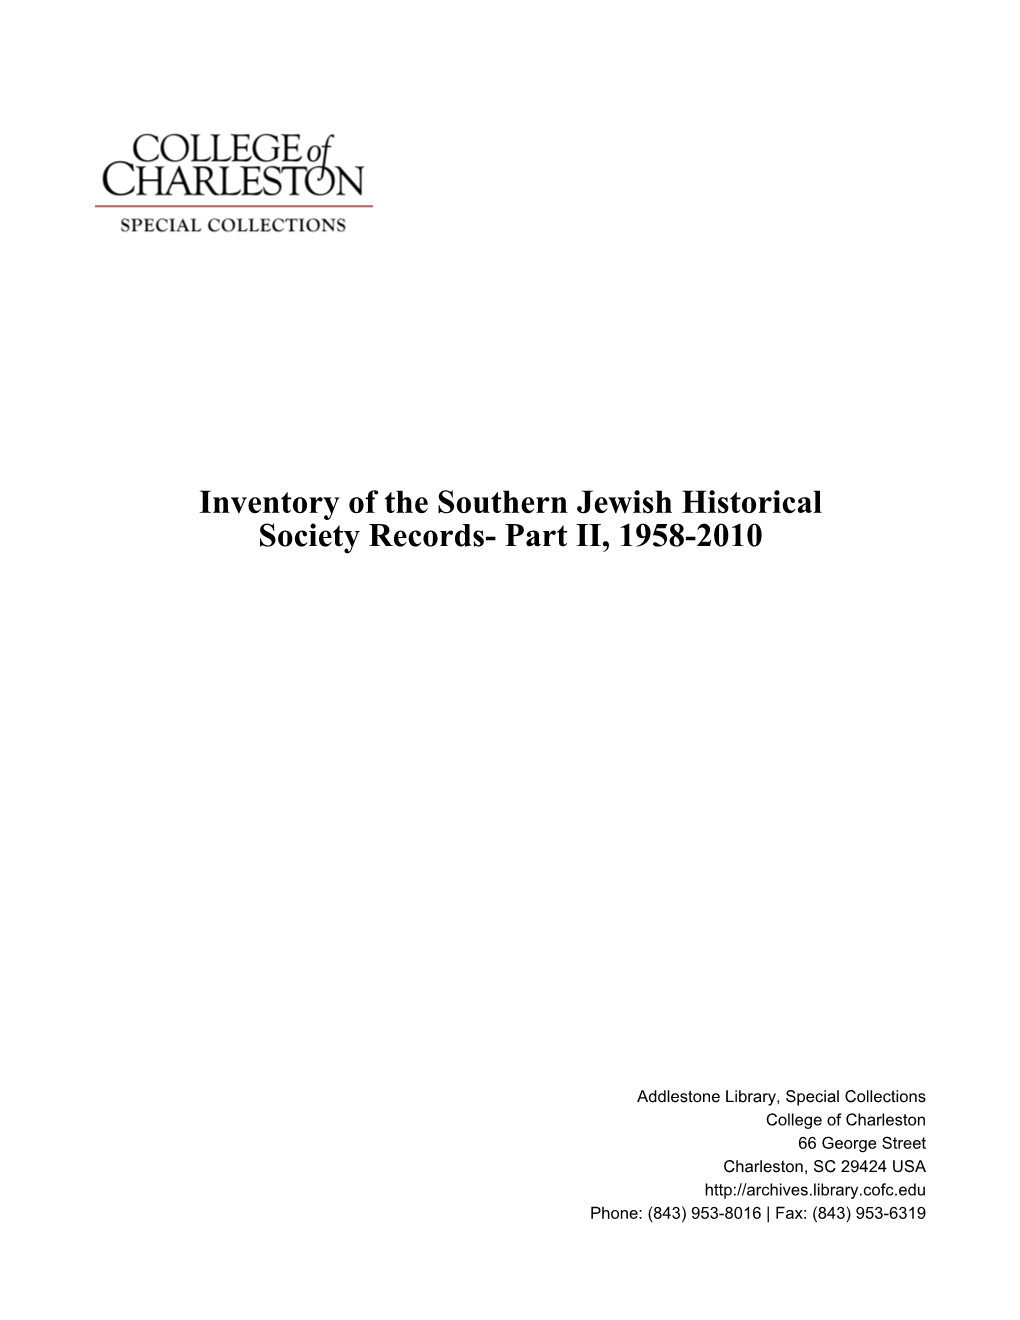 Inventory of the Southern Jewish Historical Society Records- Part II, 1958-2010